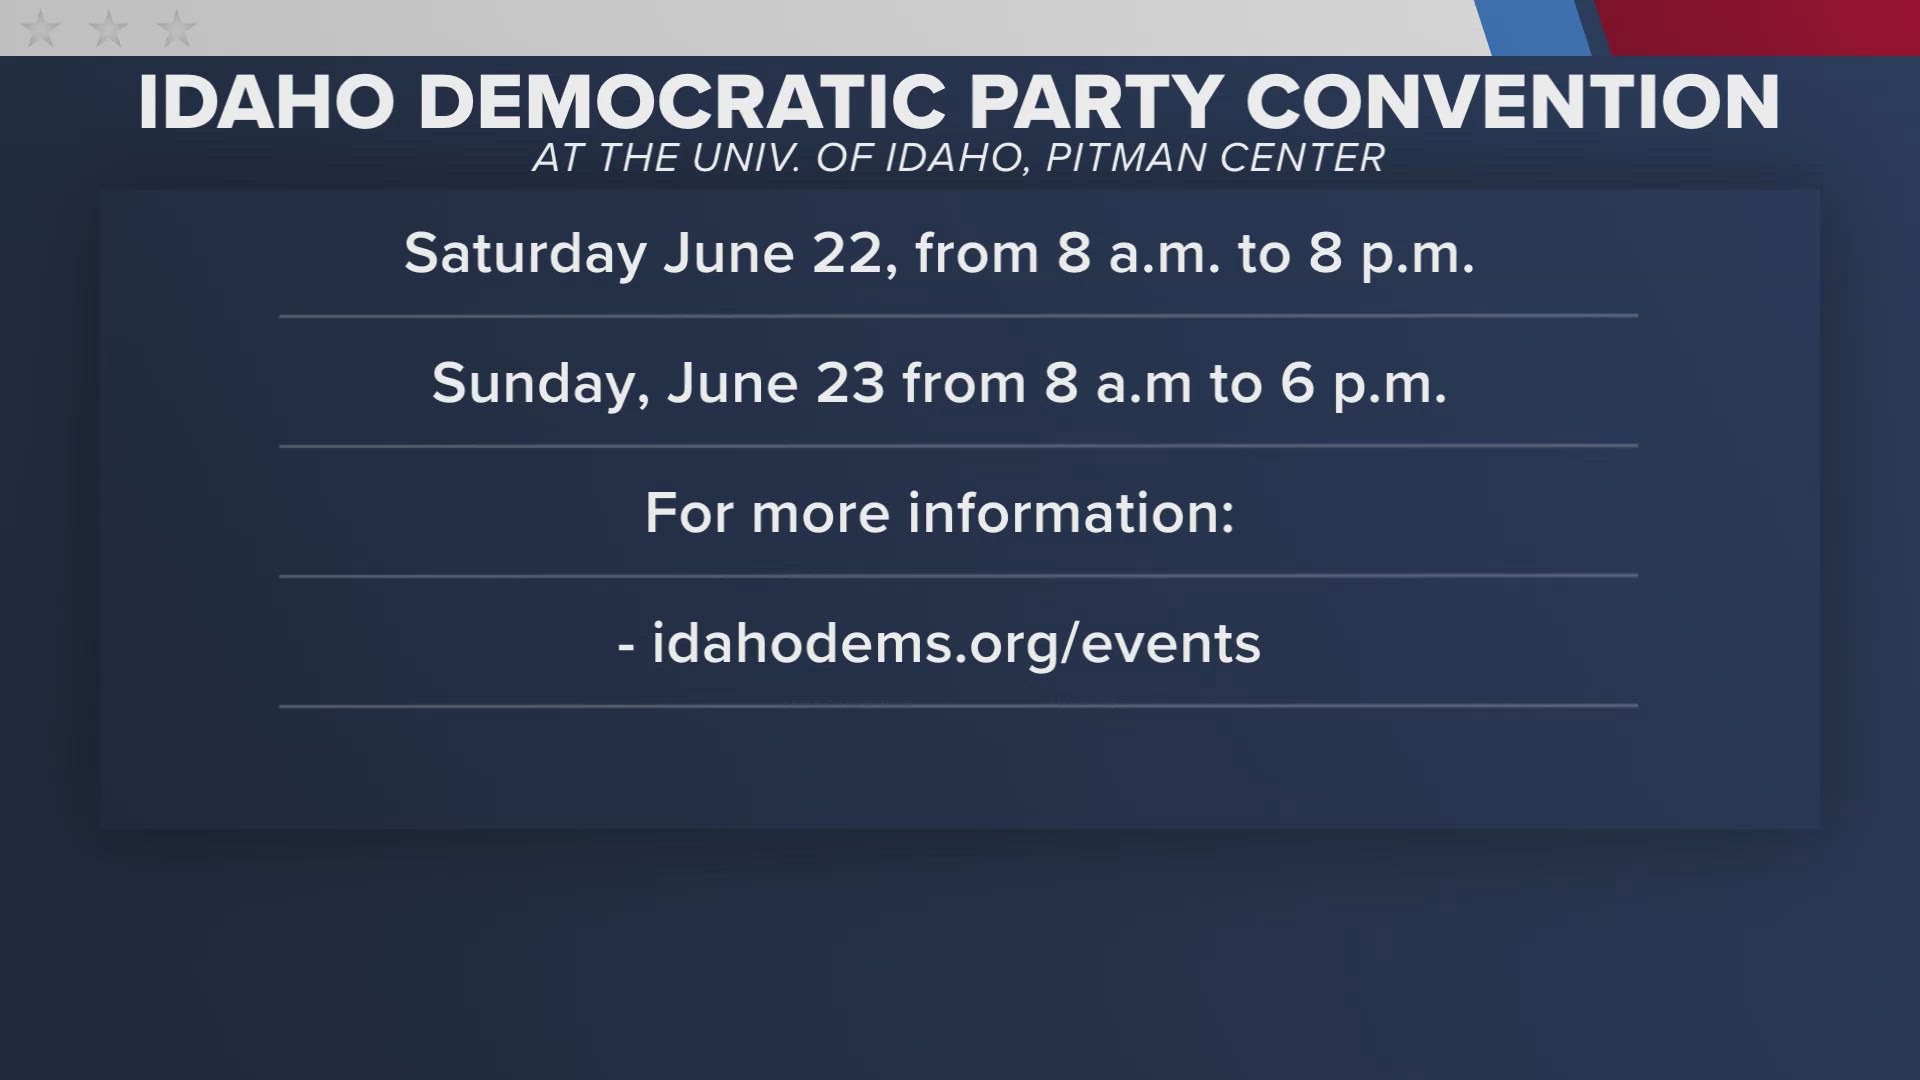 The convention is on June 22 and 23 at the University of Idaho in Moscow.